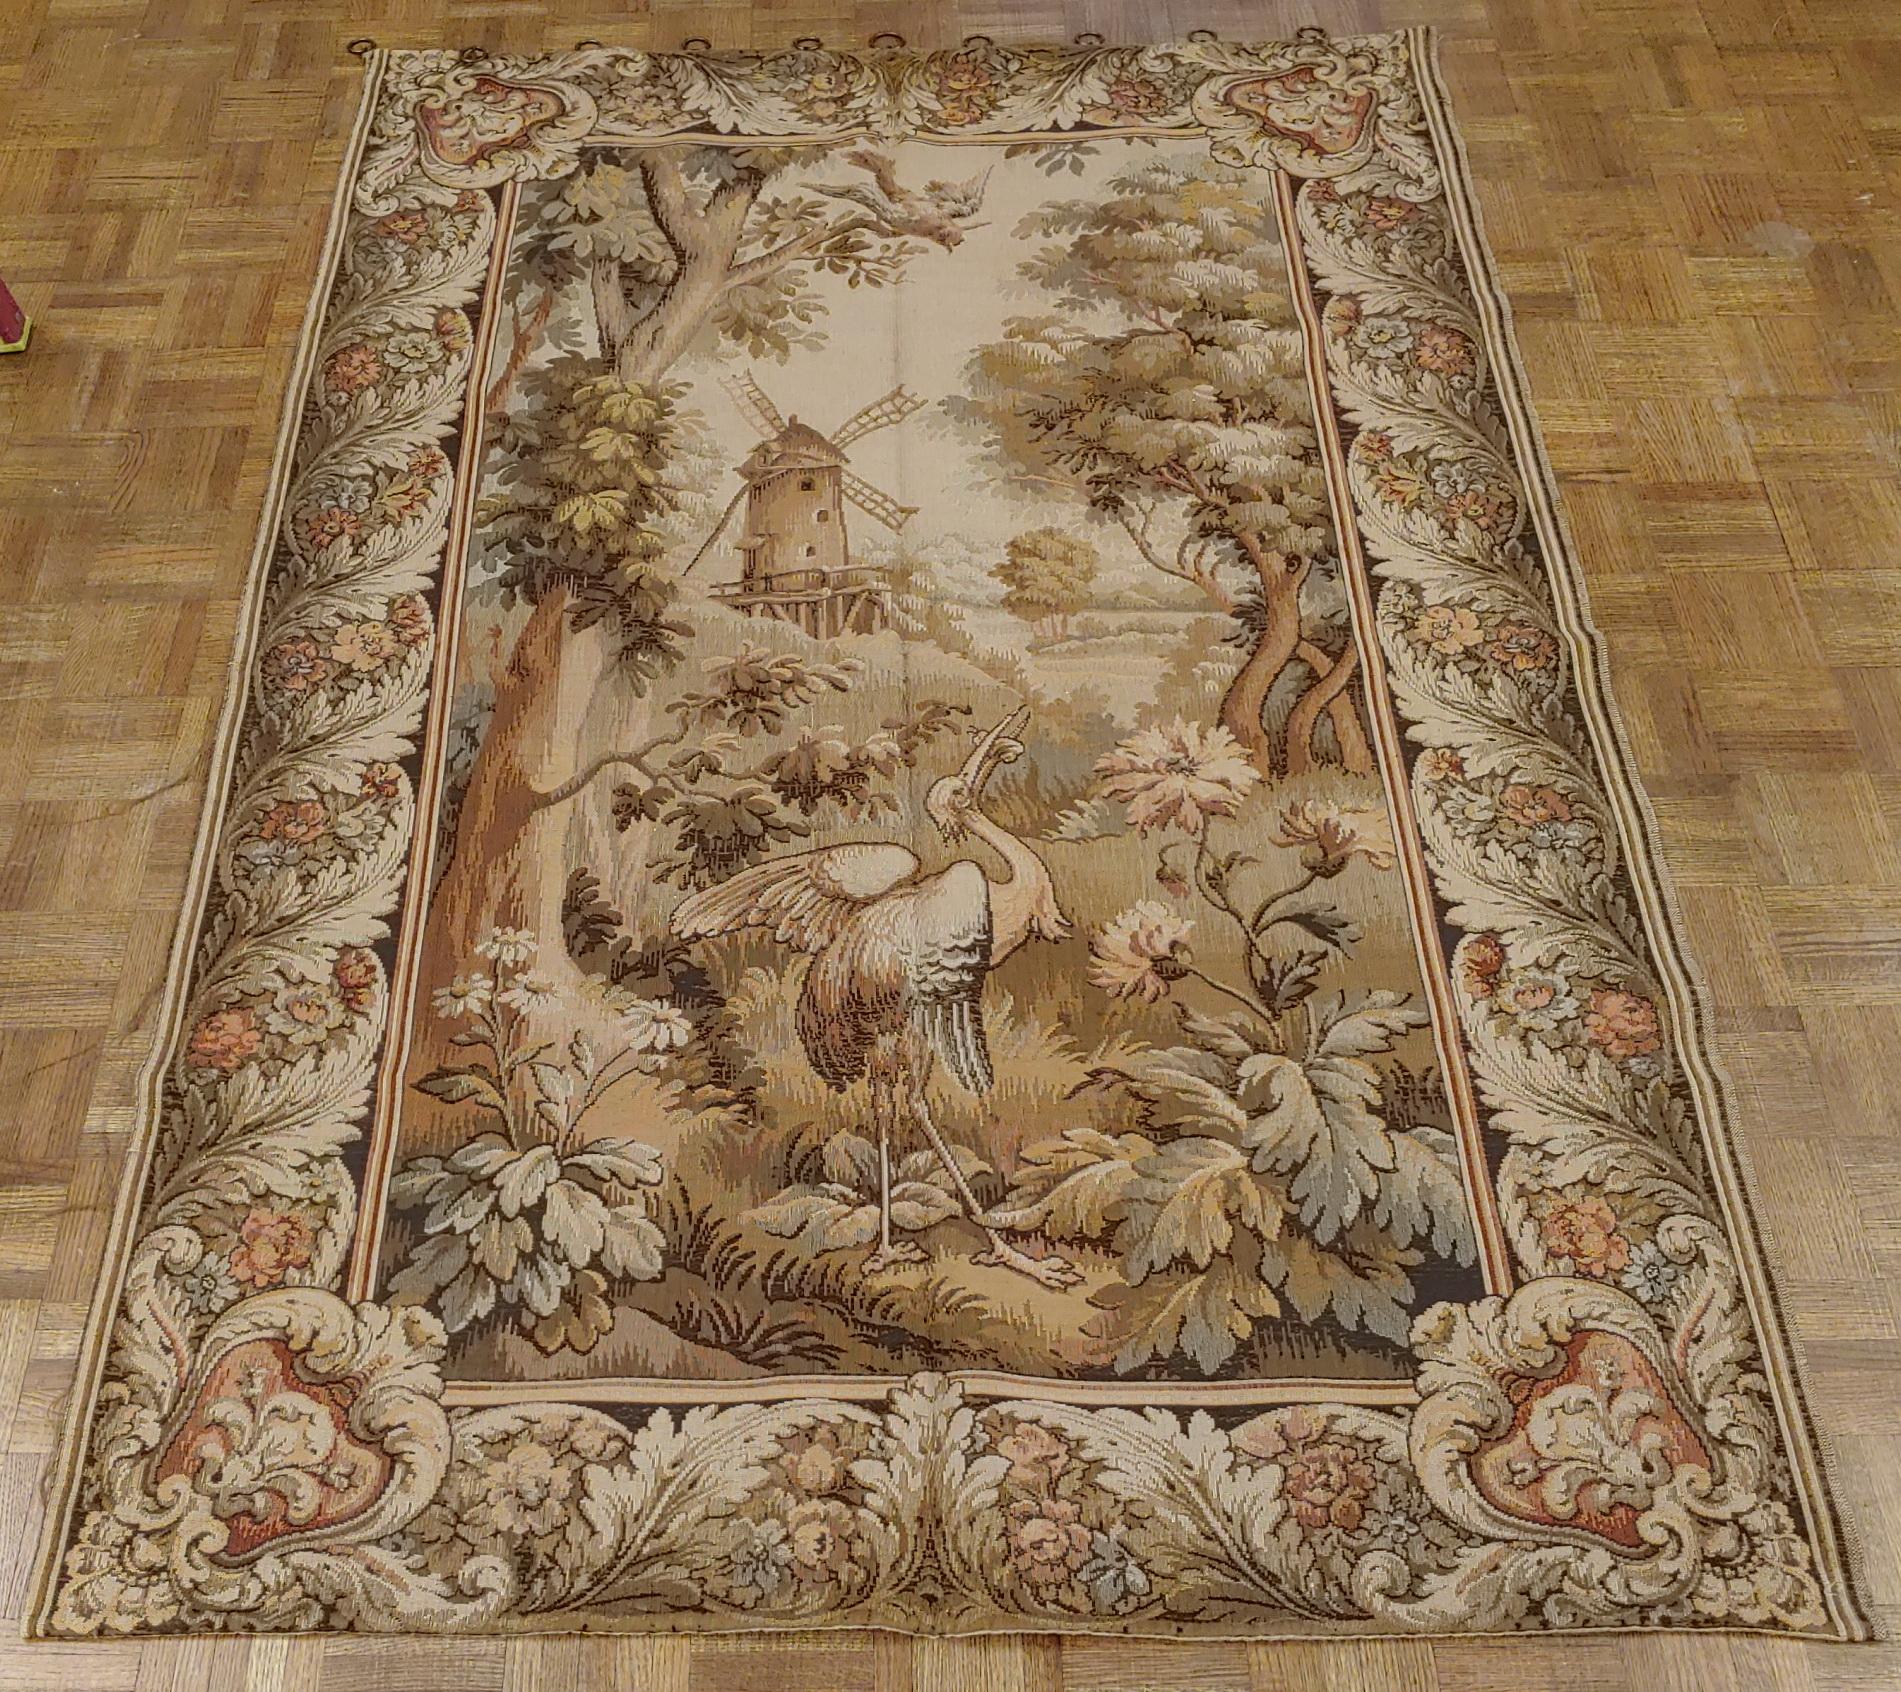 This is an exquisite French loomed tapestry. These tapestries were machine loomed in the early 20th century to compete with the hand-woven Aubusson and Flemish tapestries. This one is decorated with a beautiful crane in the foreground and a wind